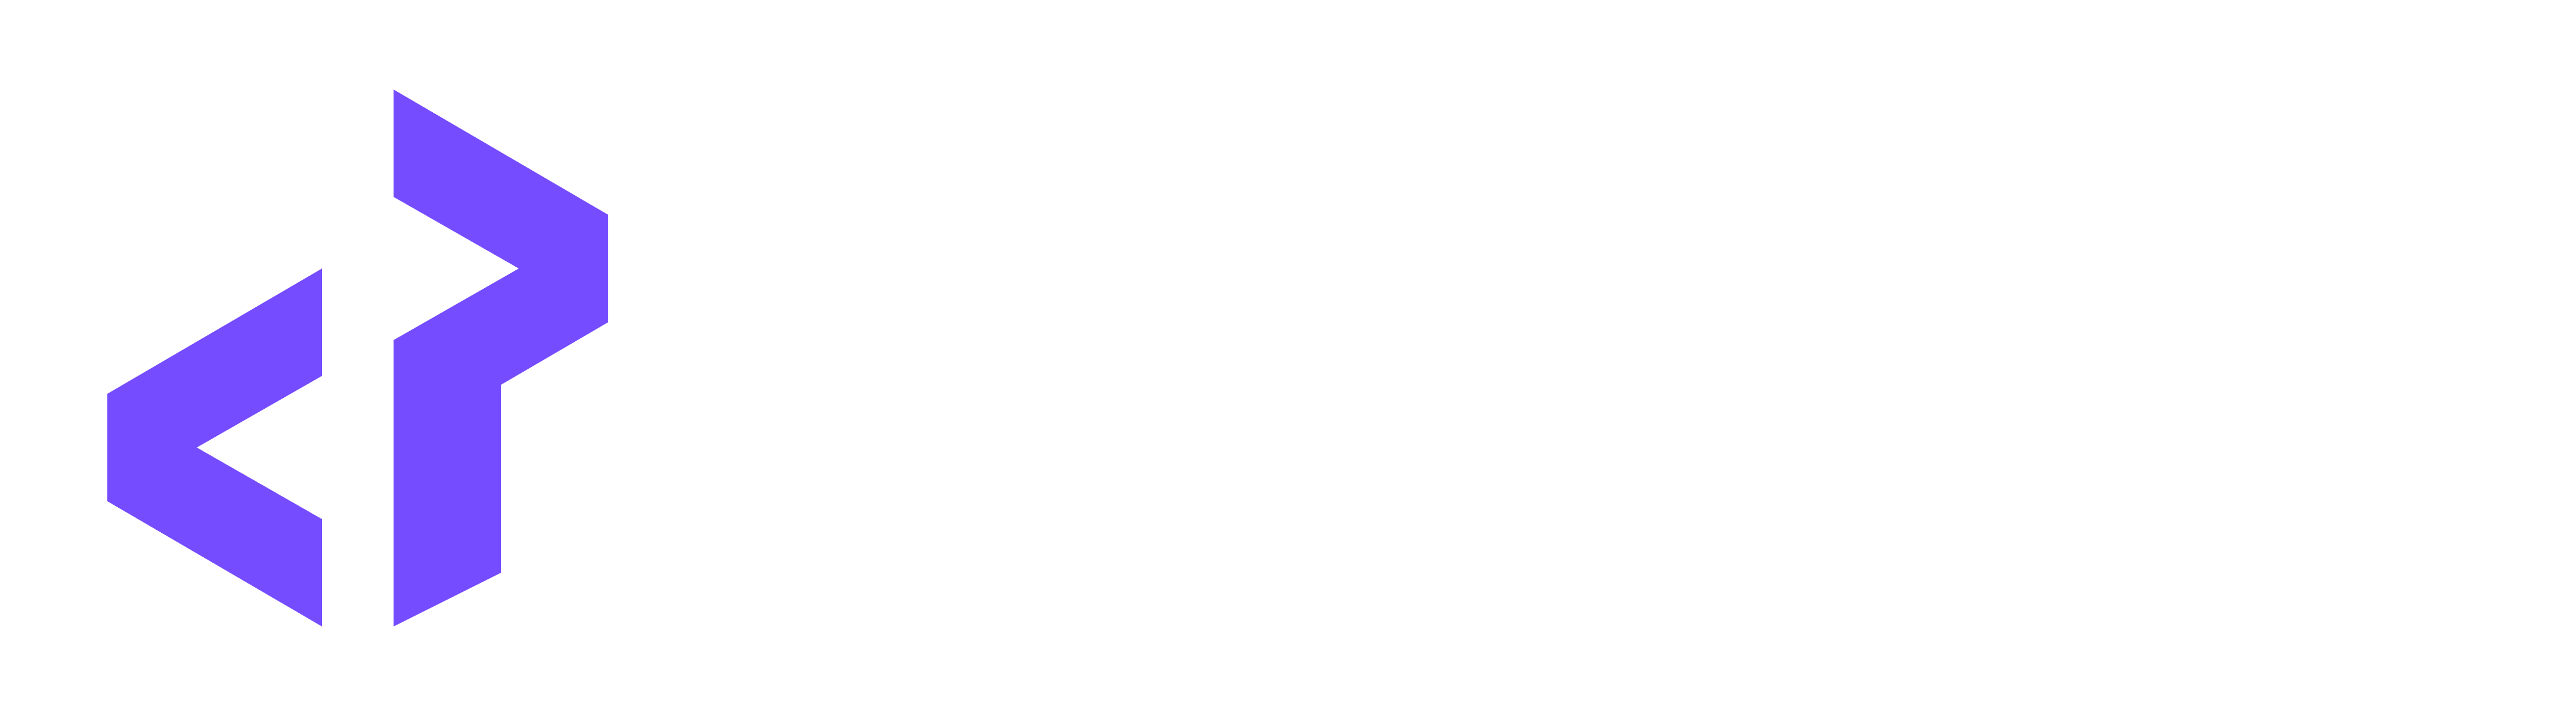 Privado has fueled the development of extra features in Java/Python/JavaScript and the data-flow engine. They have also funded the type propagation initiative, and initiated the development of the Go, Ruby, &amp; C# frontends. Their core analysis framework is also open-source.